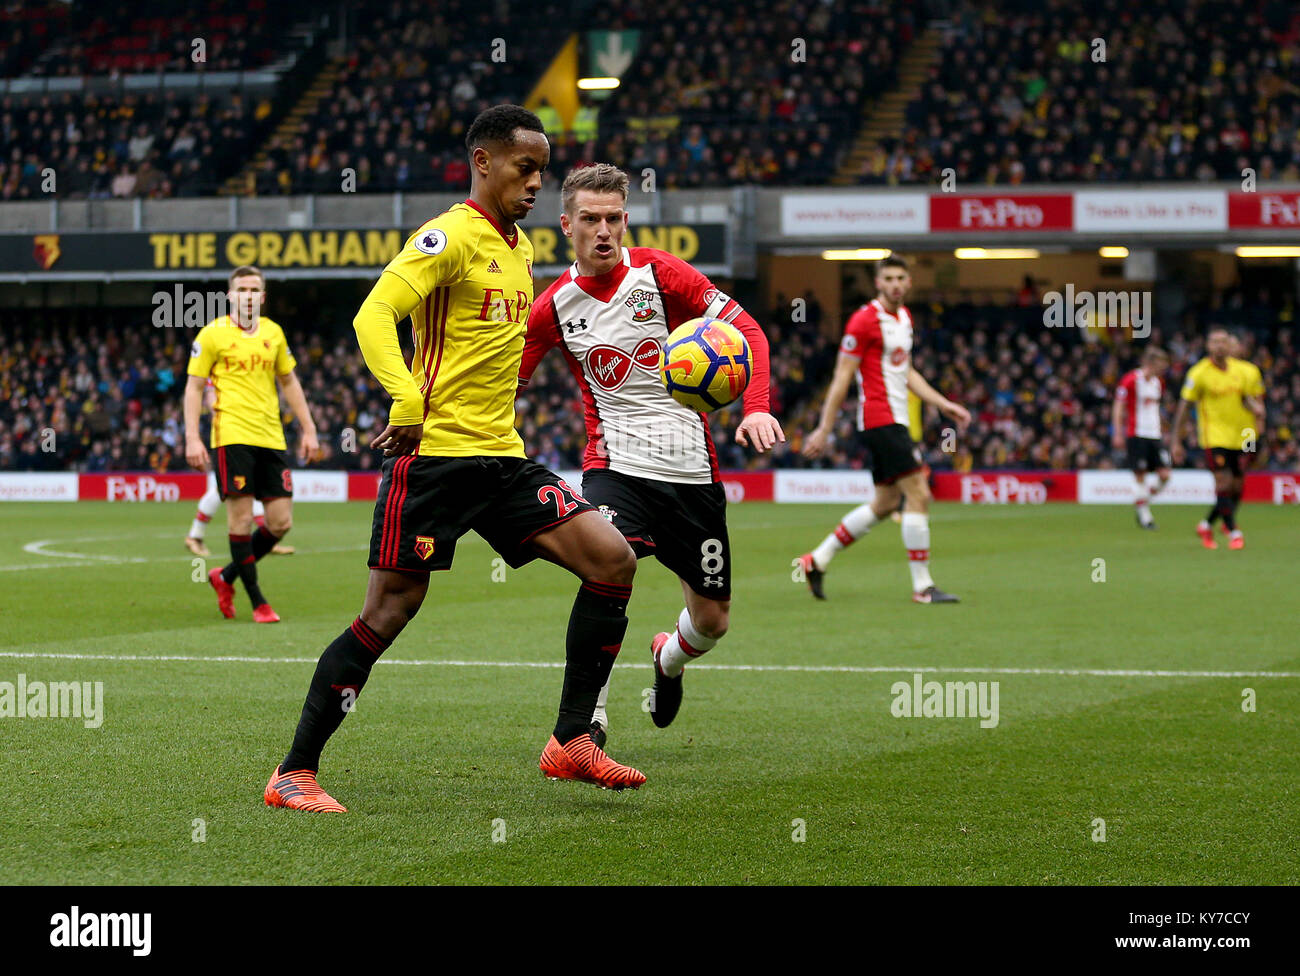 Watford's Andre Carrillo (left) and Southampton's Steven Davis (right) battle for the ball during the Premier League match at Vicarage Road, Watford Stock Photo